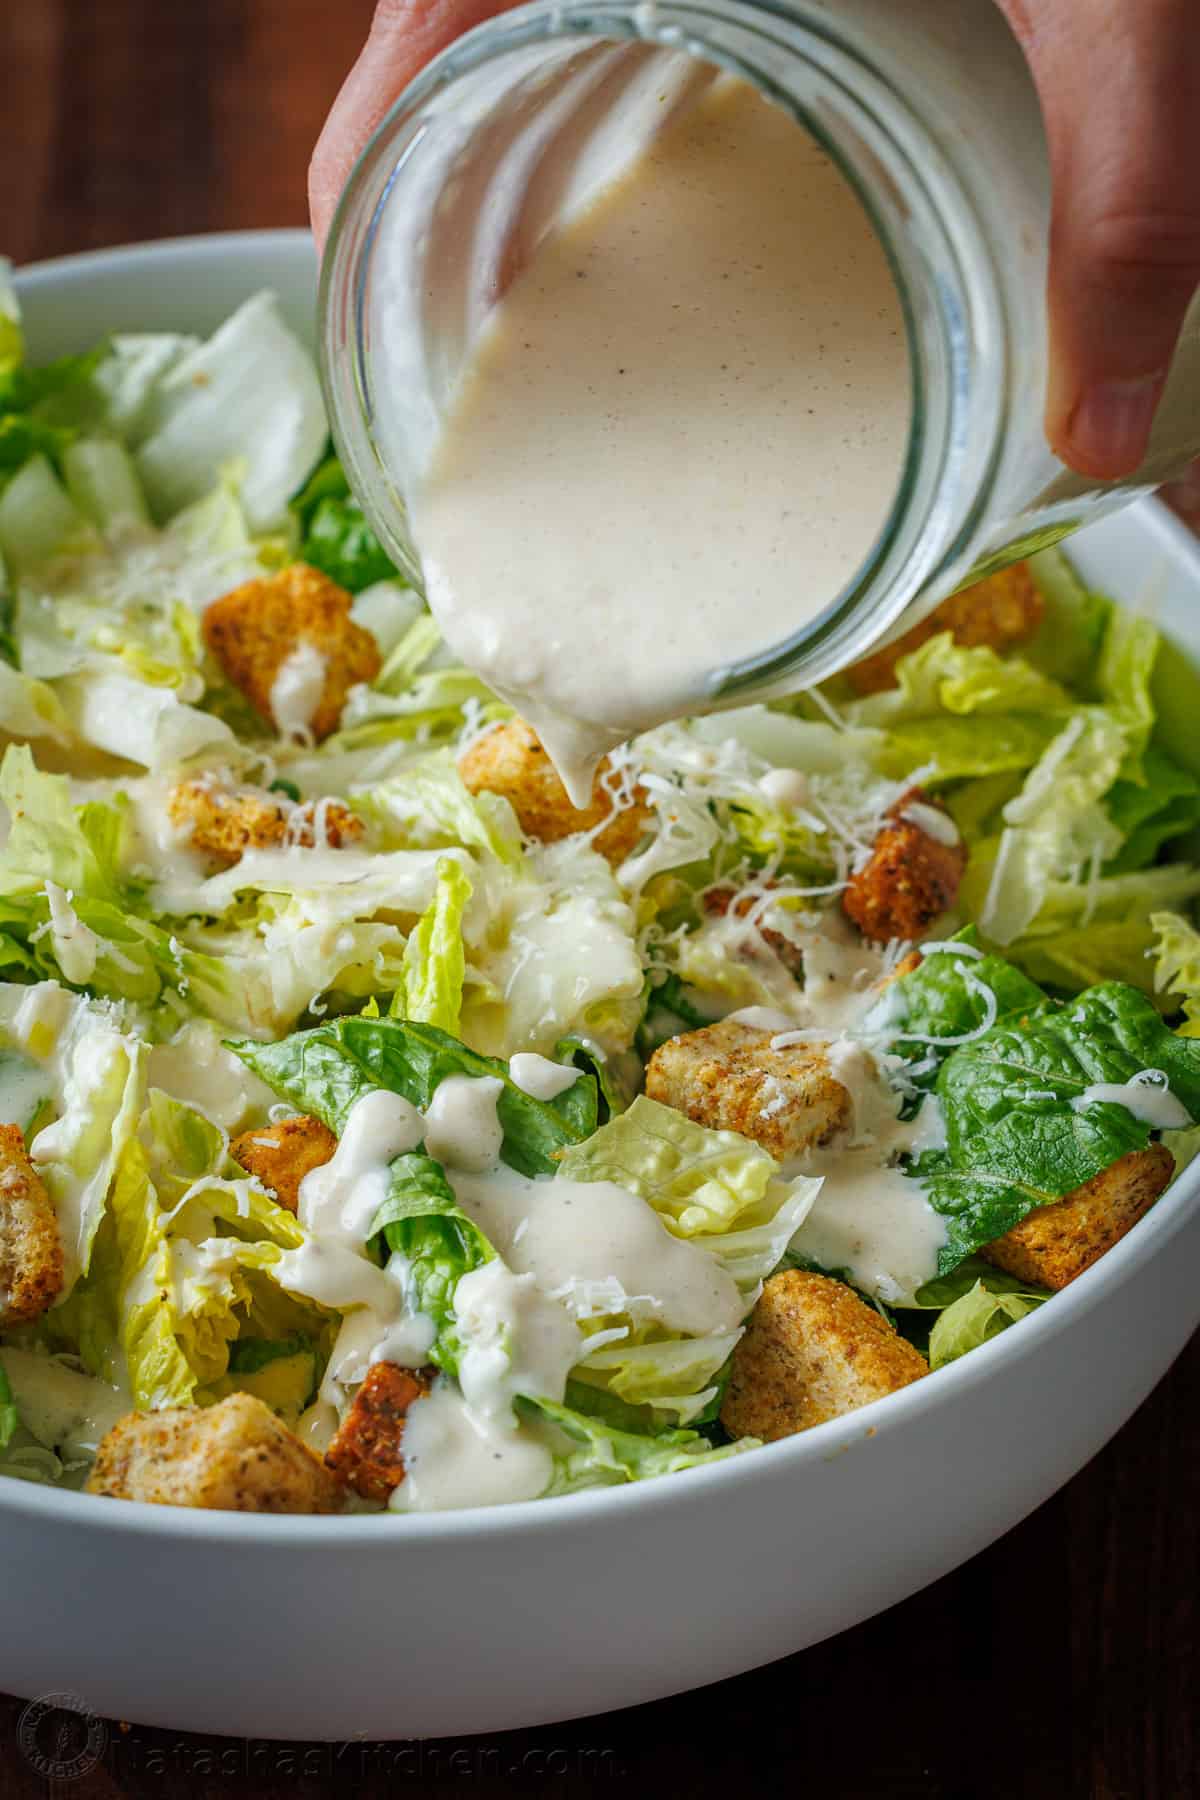 Pouring creamy caesar dressing over salad